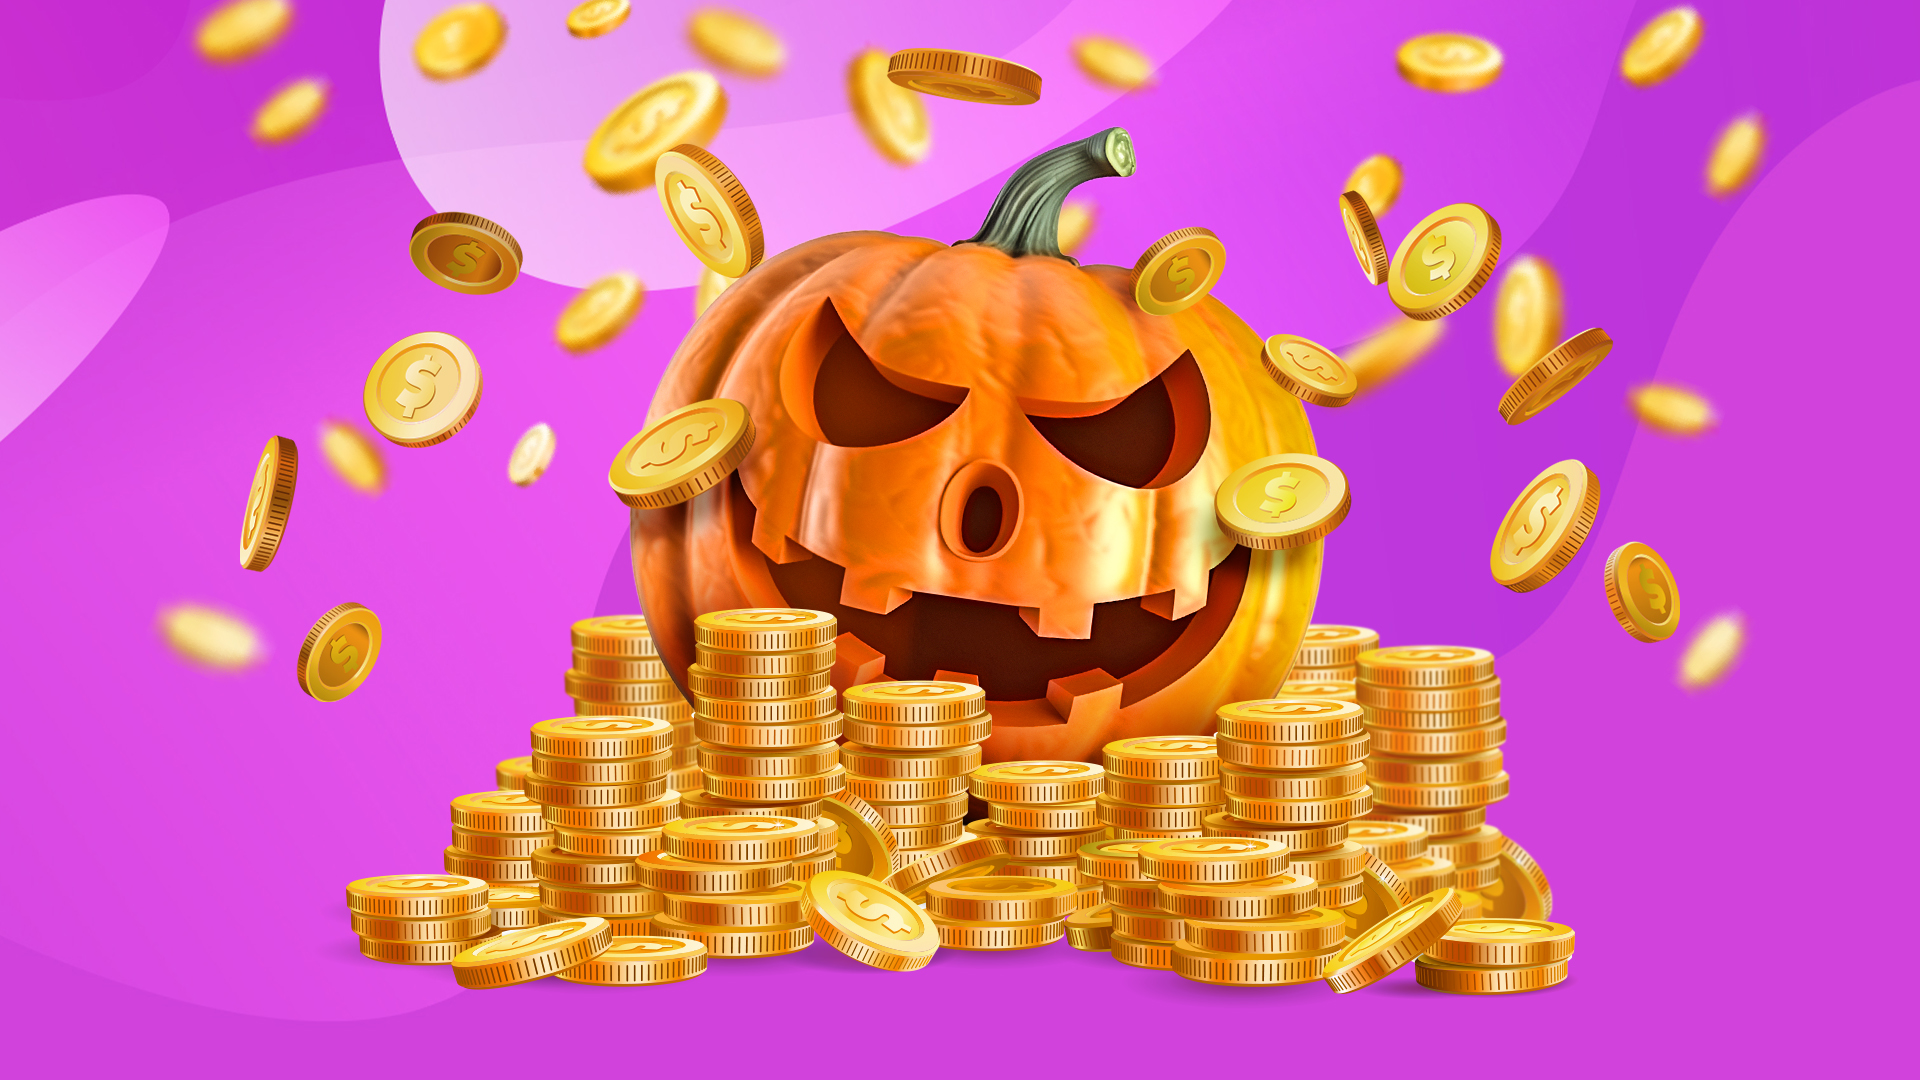 A jack-o'-lantern is surrounded by stacks of gold coins against a purple background.